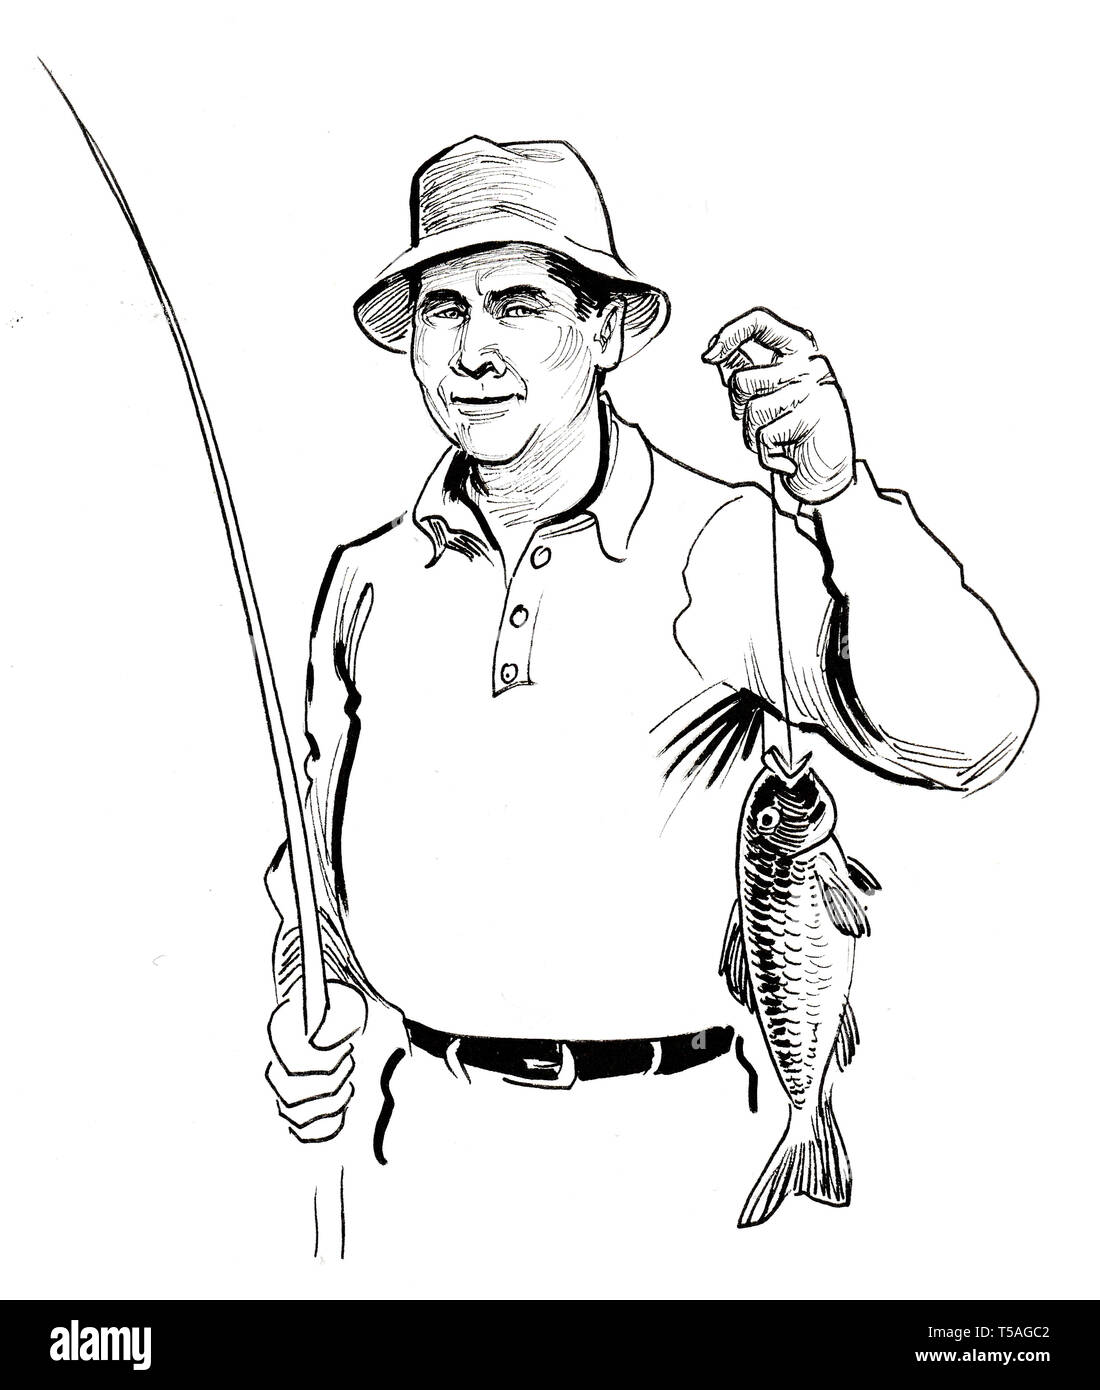 Black man holding fish fishing Cut Out Stock Images & Pictures - Alamy